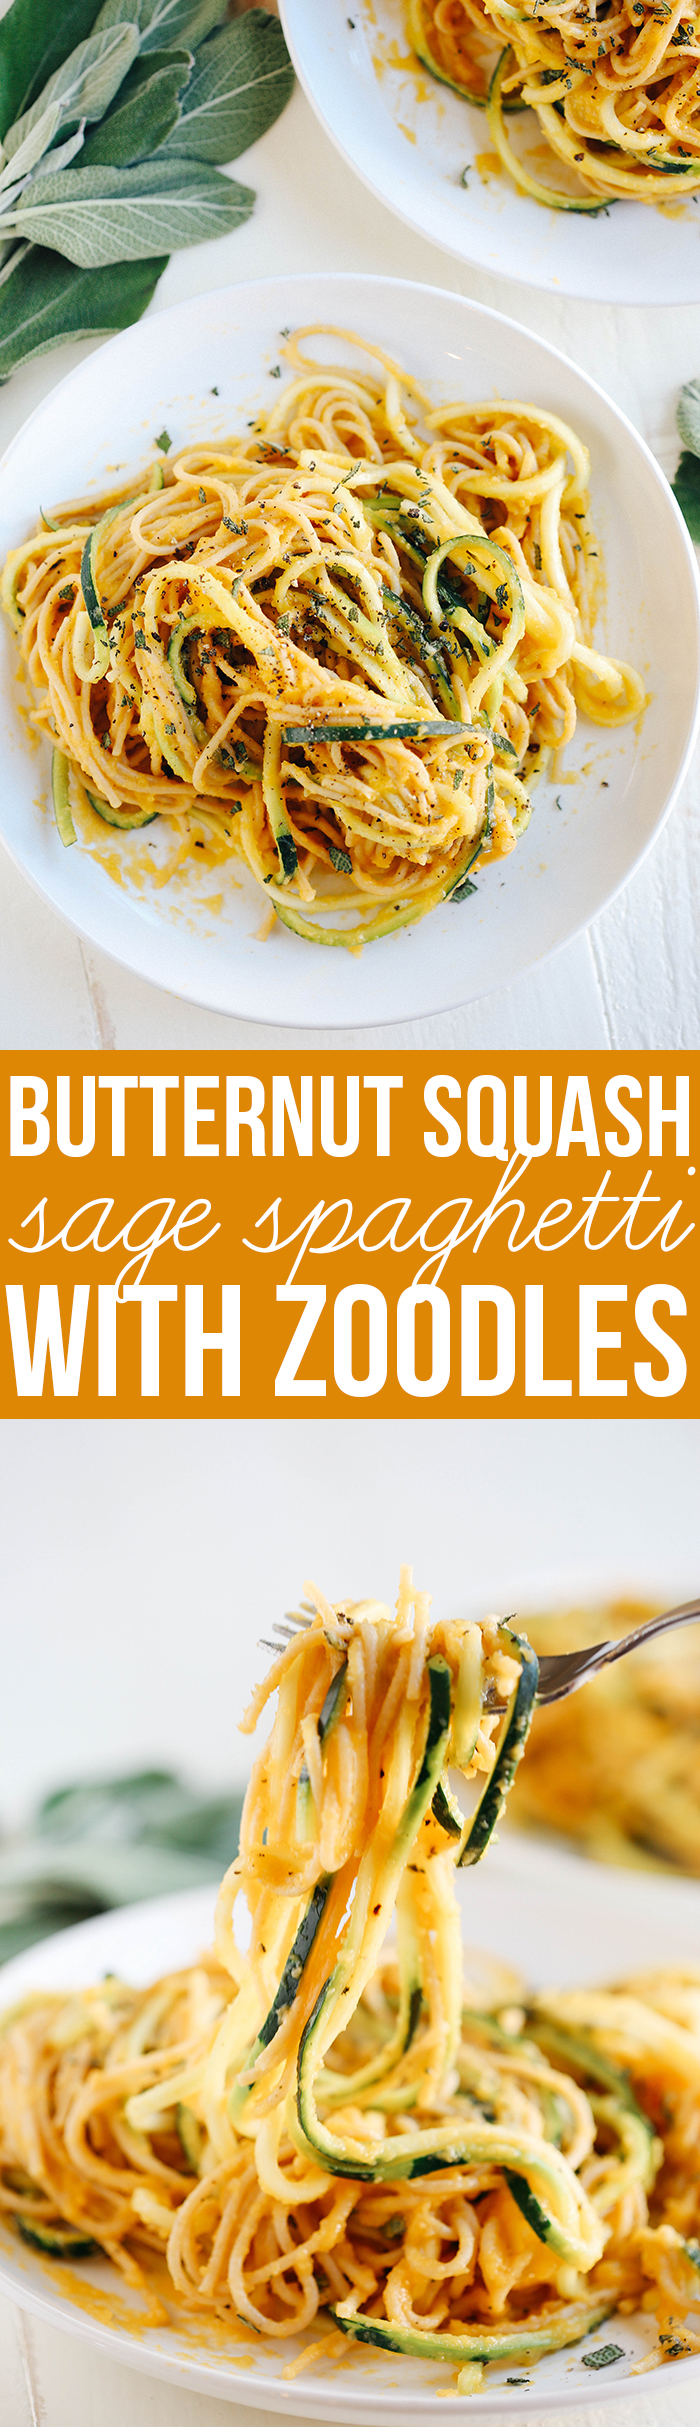 This Butternut Squash & Sage Spaghetti with Zucchini Noodles that is vegan, dairy-free and can easily be made in just 30 minutes using a few simple healthy ingredients!